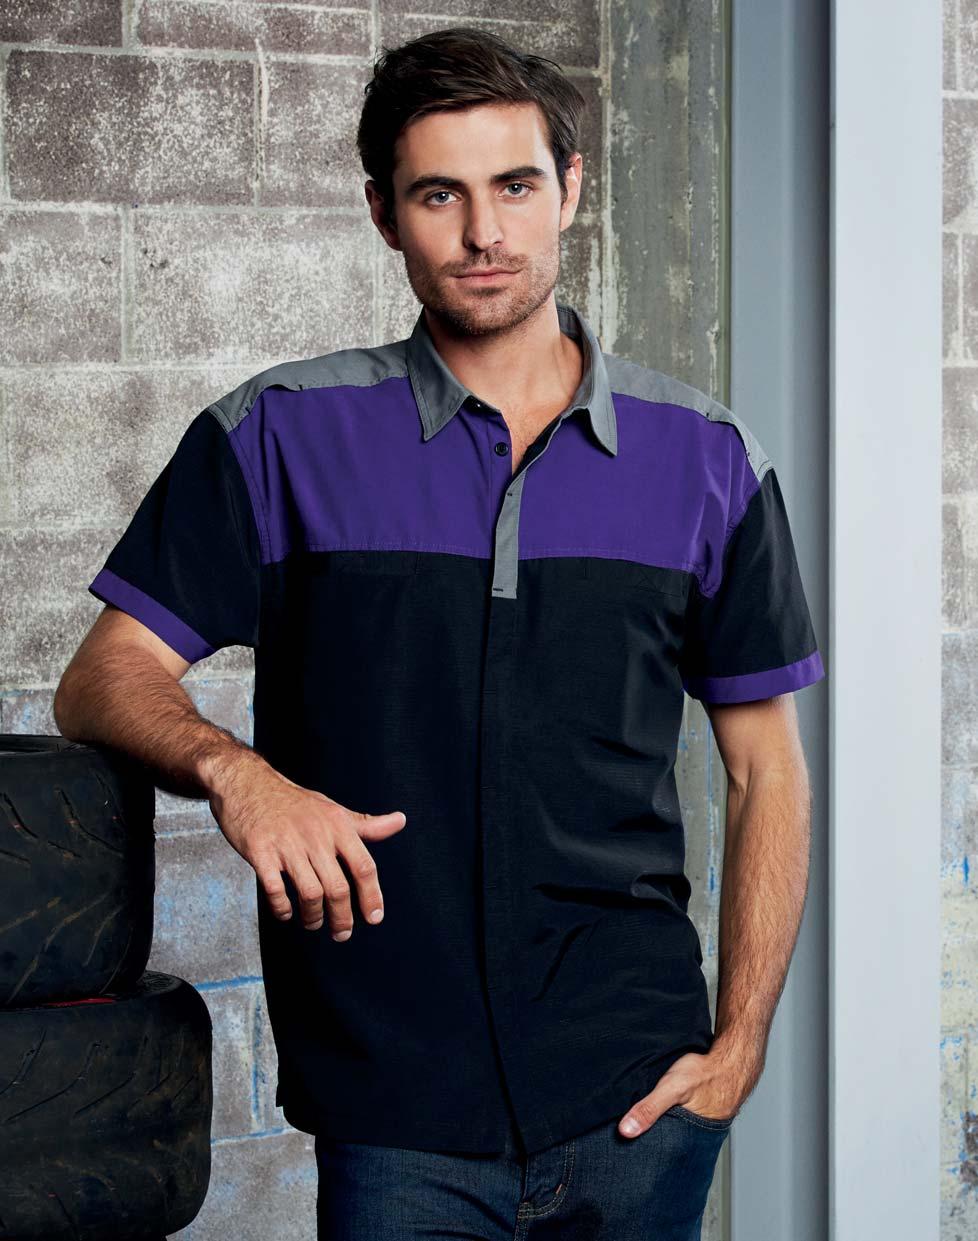 CHARGER NEW ANTIBACTERIAL COTTON-RICH FABRIC BACK AND SHOULDER AIR-FLOW VENTS S505MS MENS SHIRT